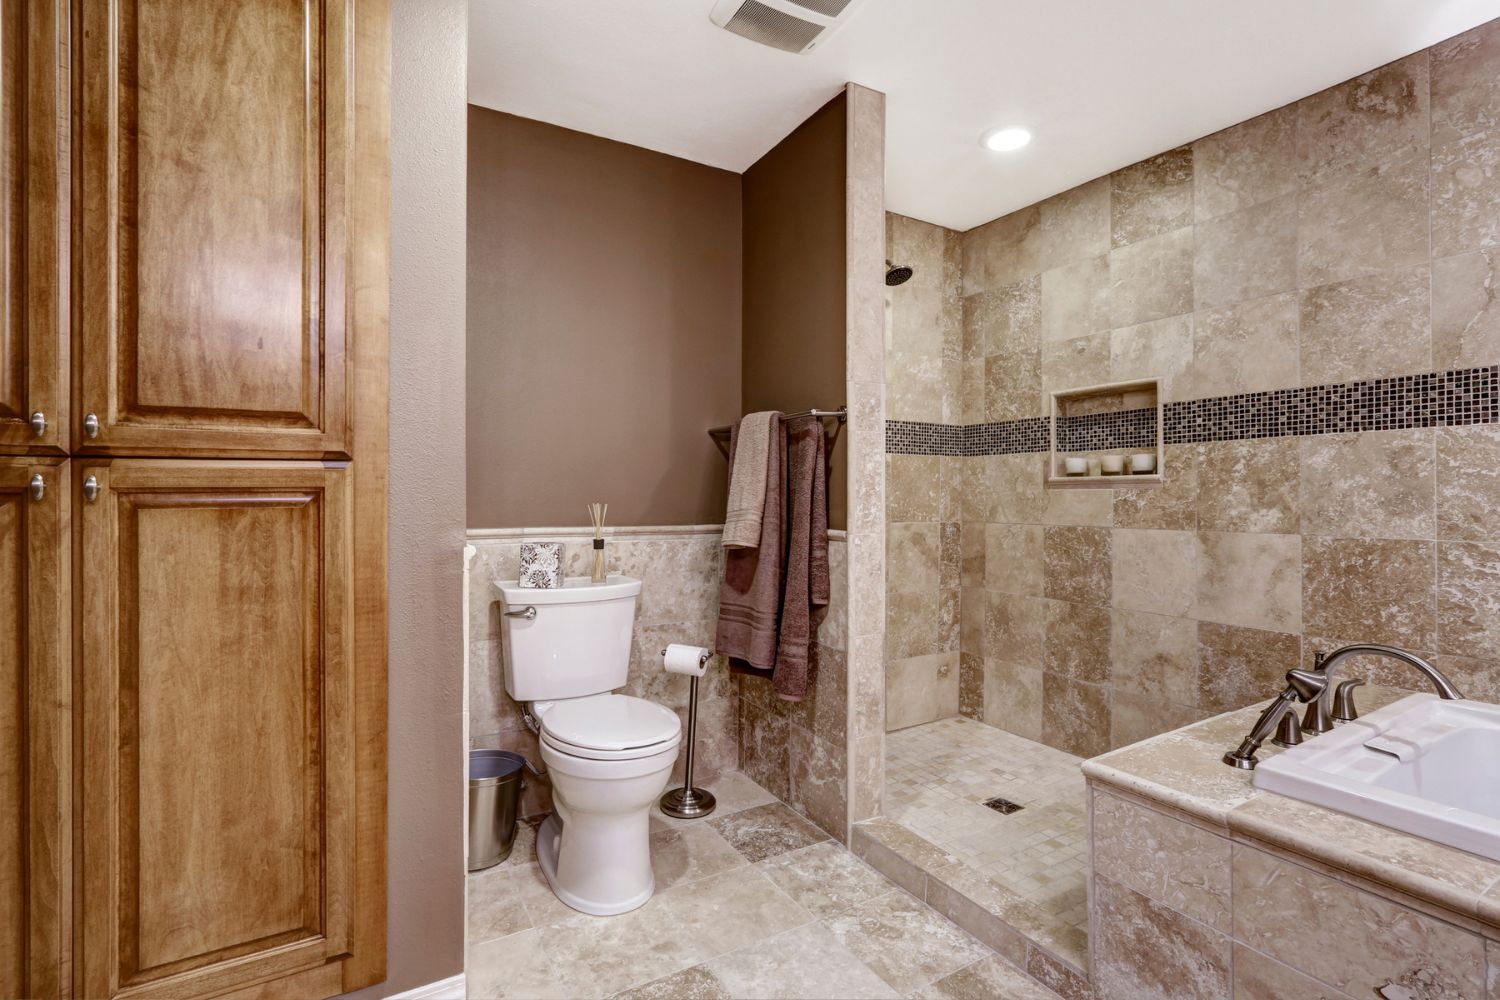 How Much Does a Bathroom Remodel Cost in New York